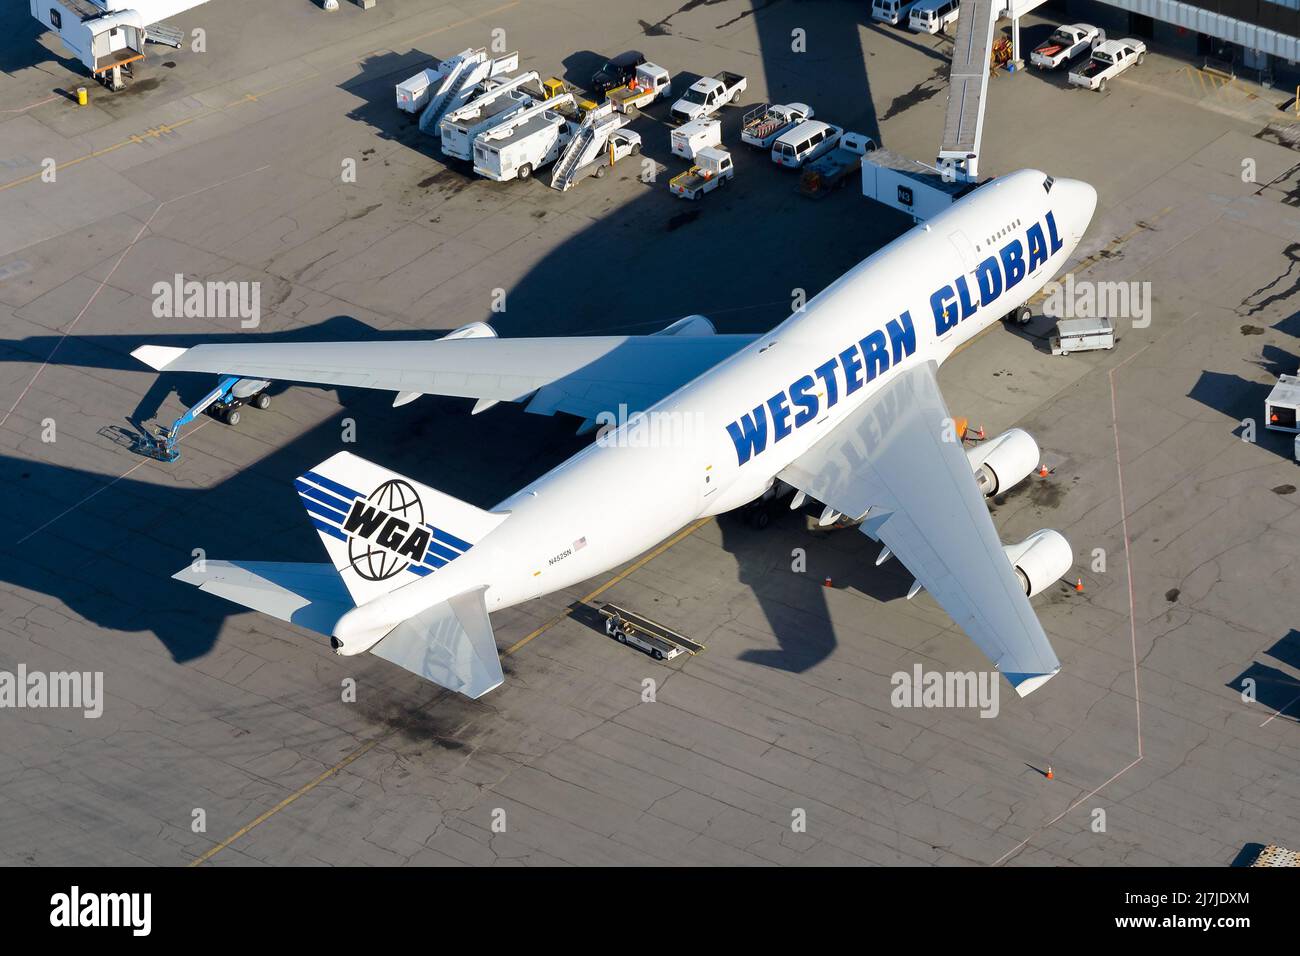 Western Global Airlines Boeing 747 cargo aircraft. Plane B747 for freight. Airplane Boeing 747-400F. Stock Photo